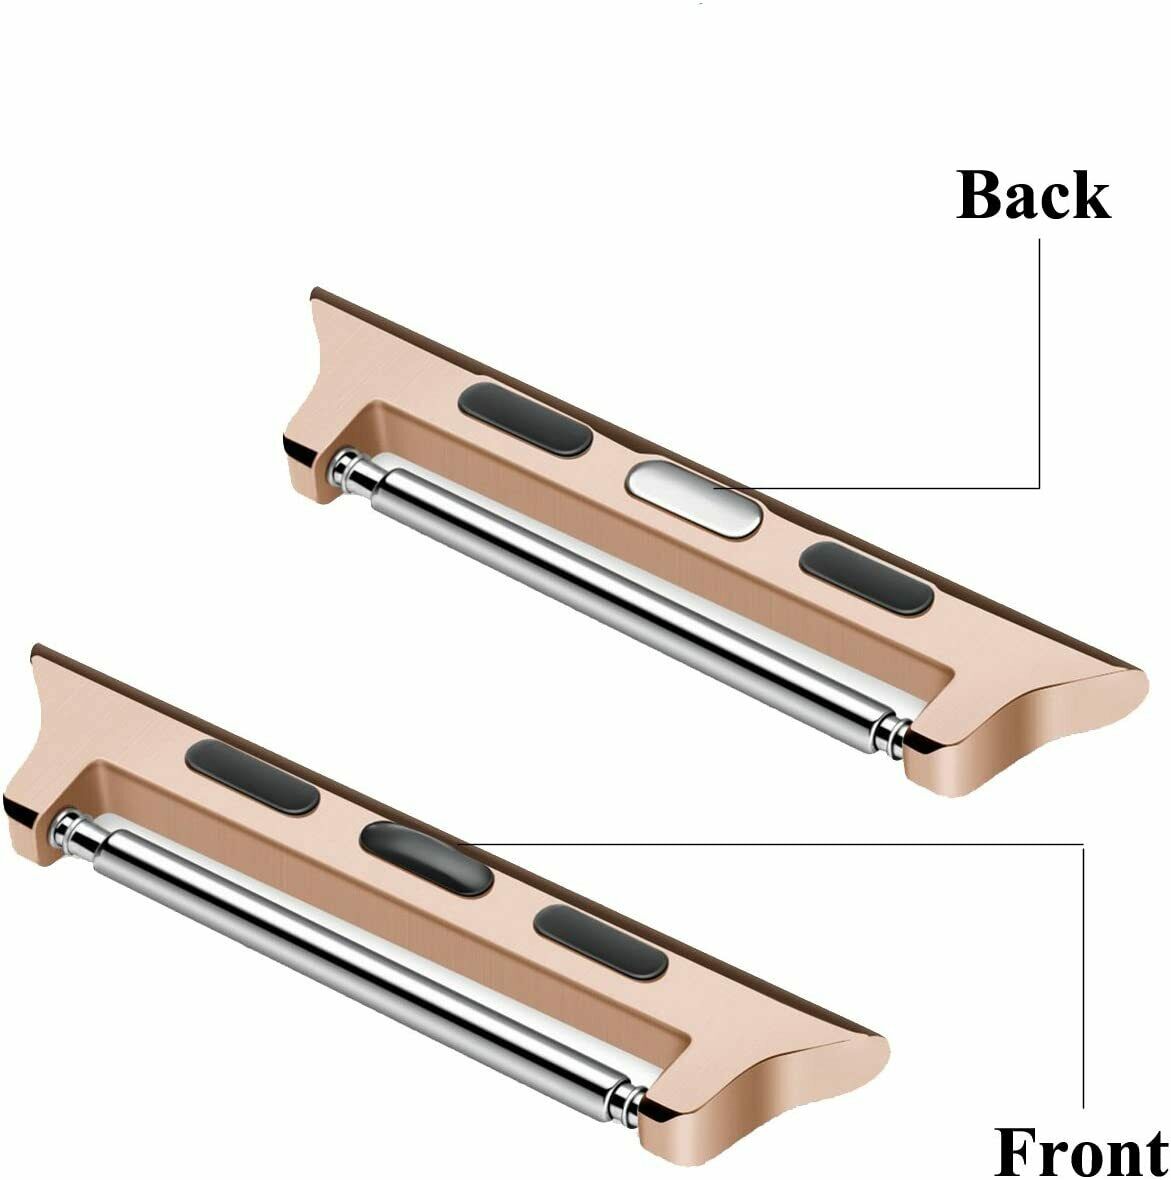 Replacement Band Connectors for Apple Watch Straps - Silver, Rose Gold, Black, Gold